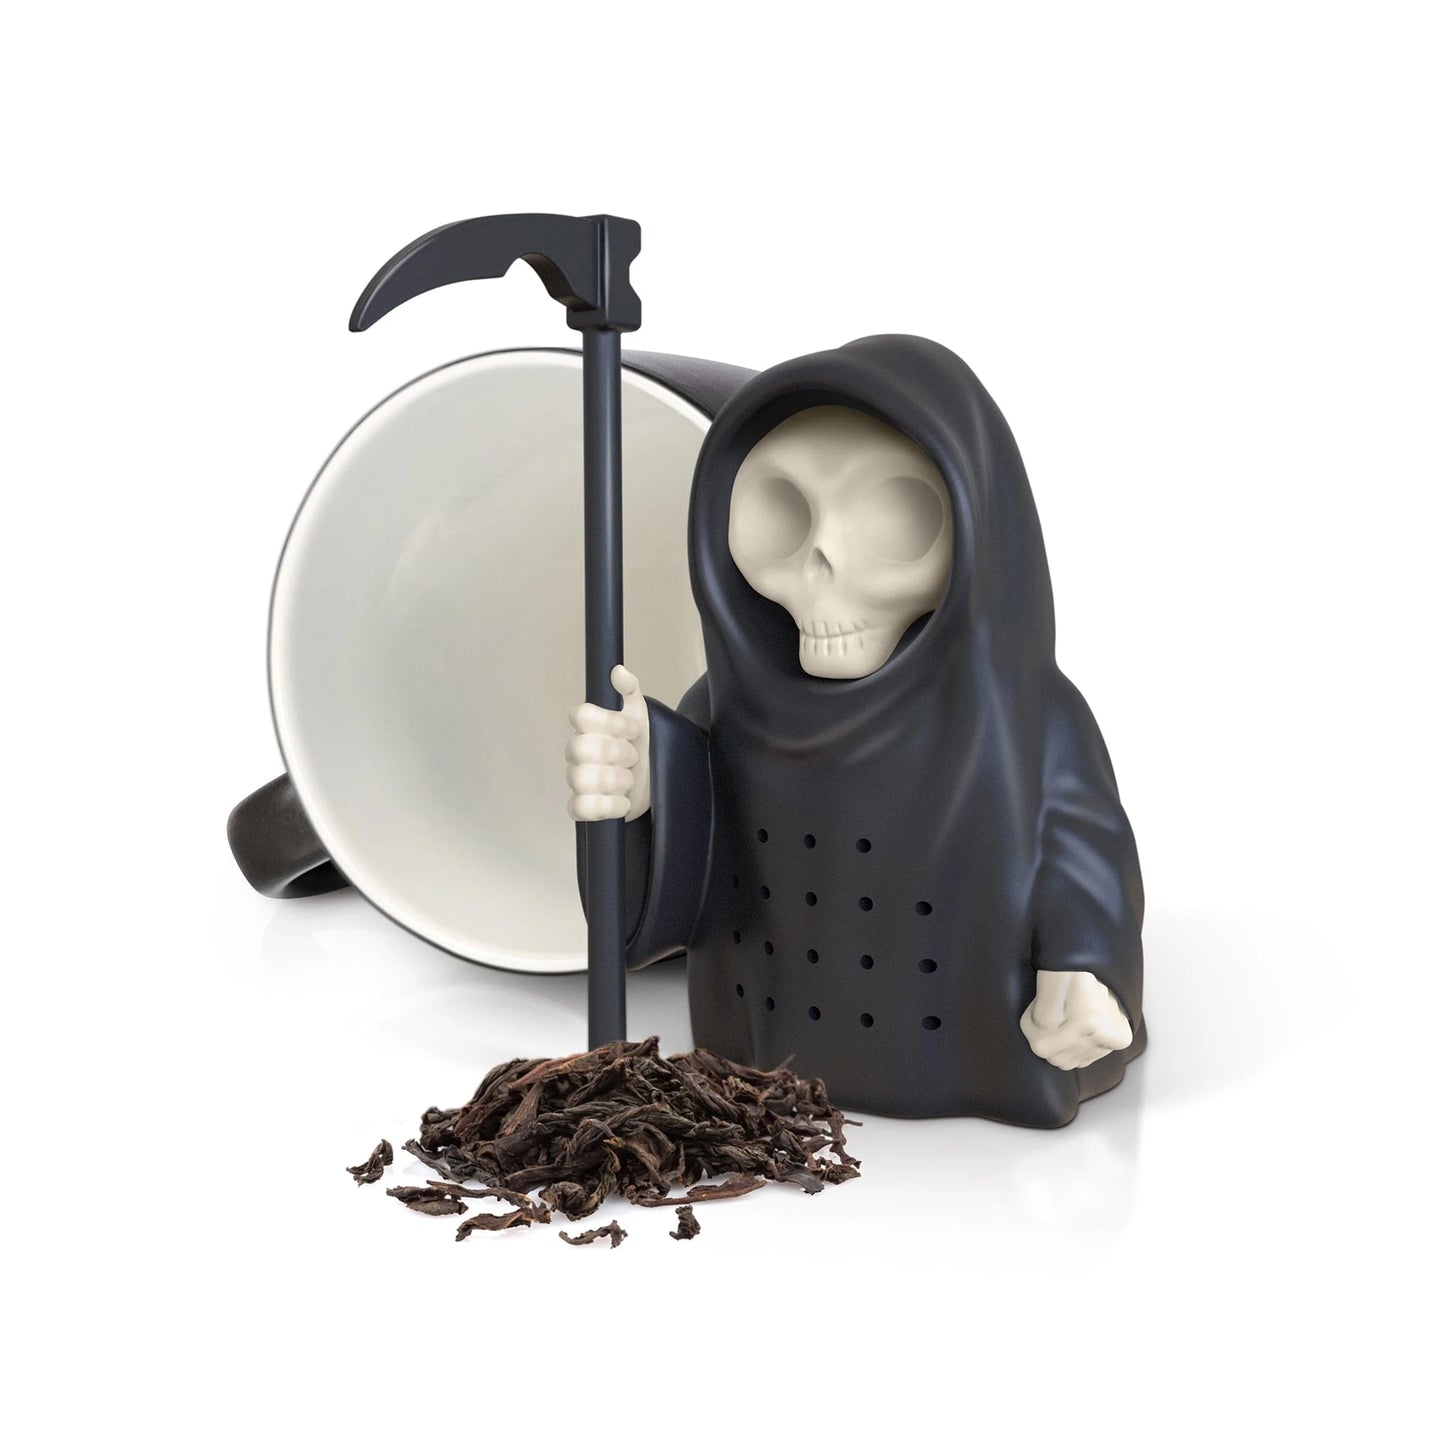 Grim Steeper Tea Infuser set next to a pile of loose tea and an empty mug.